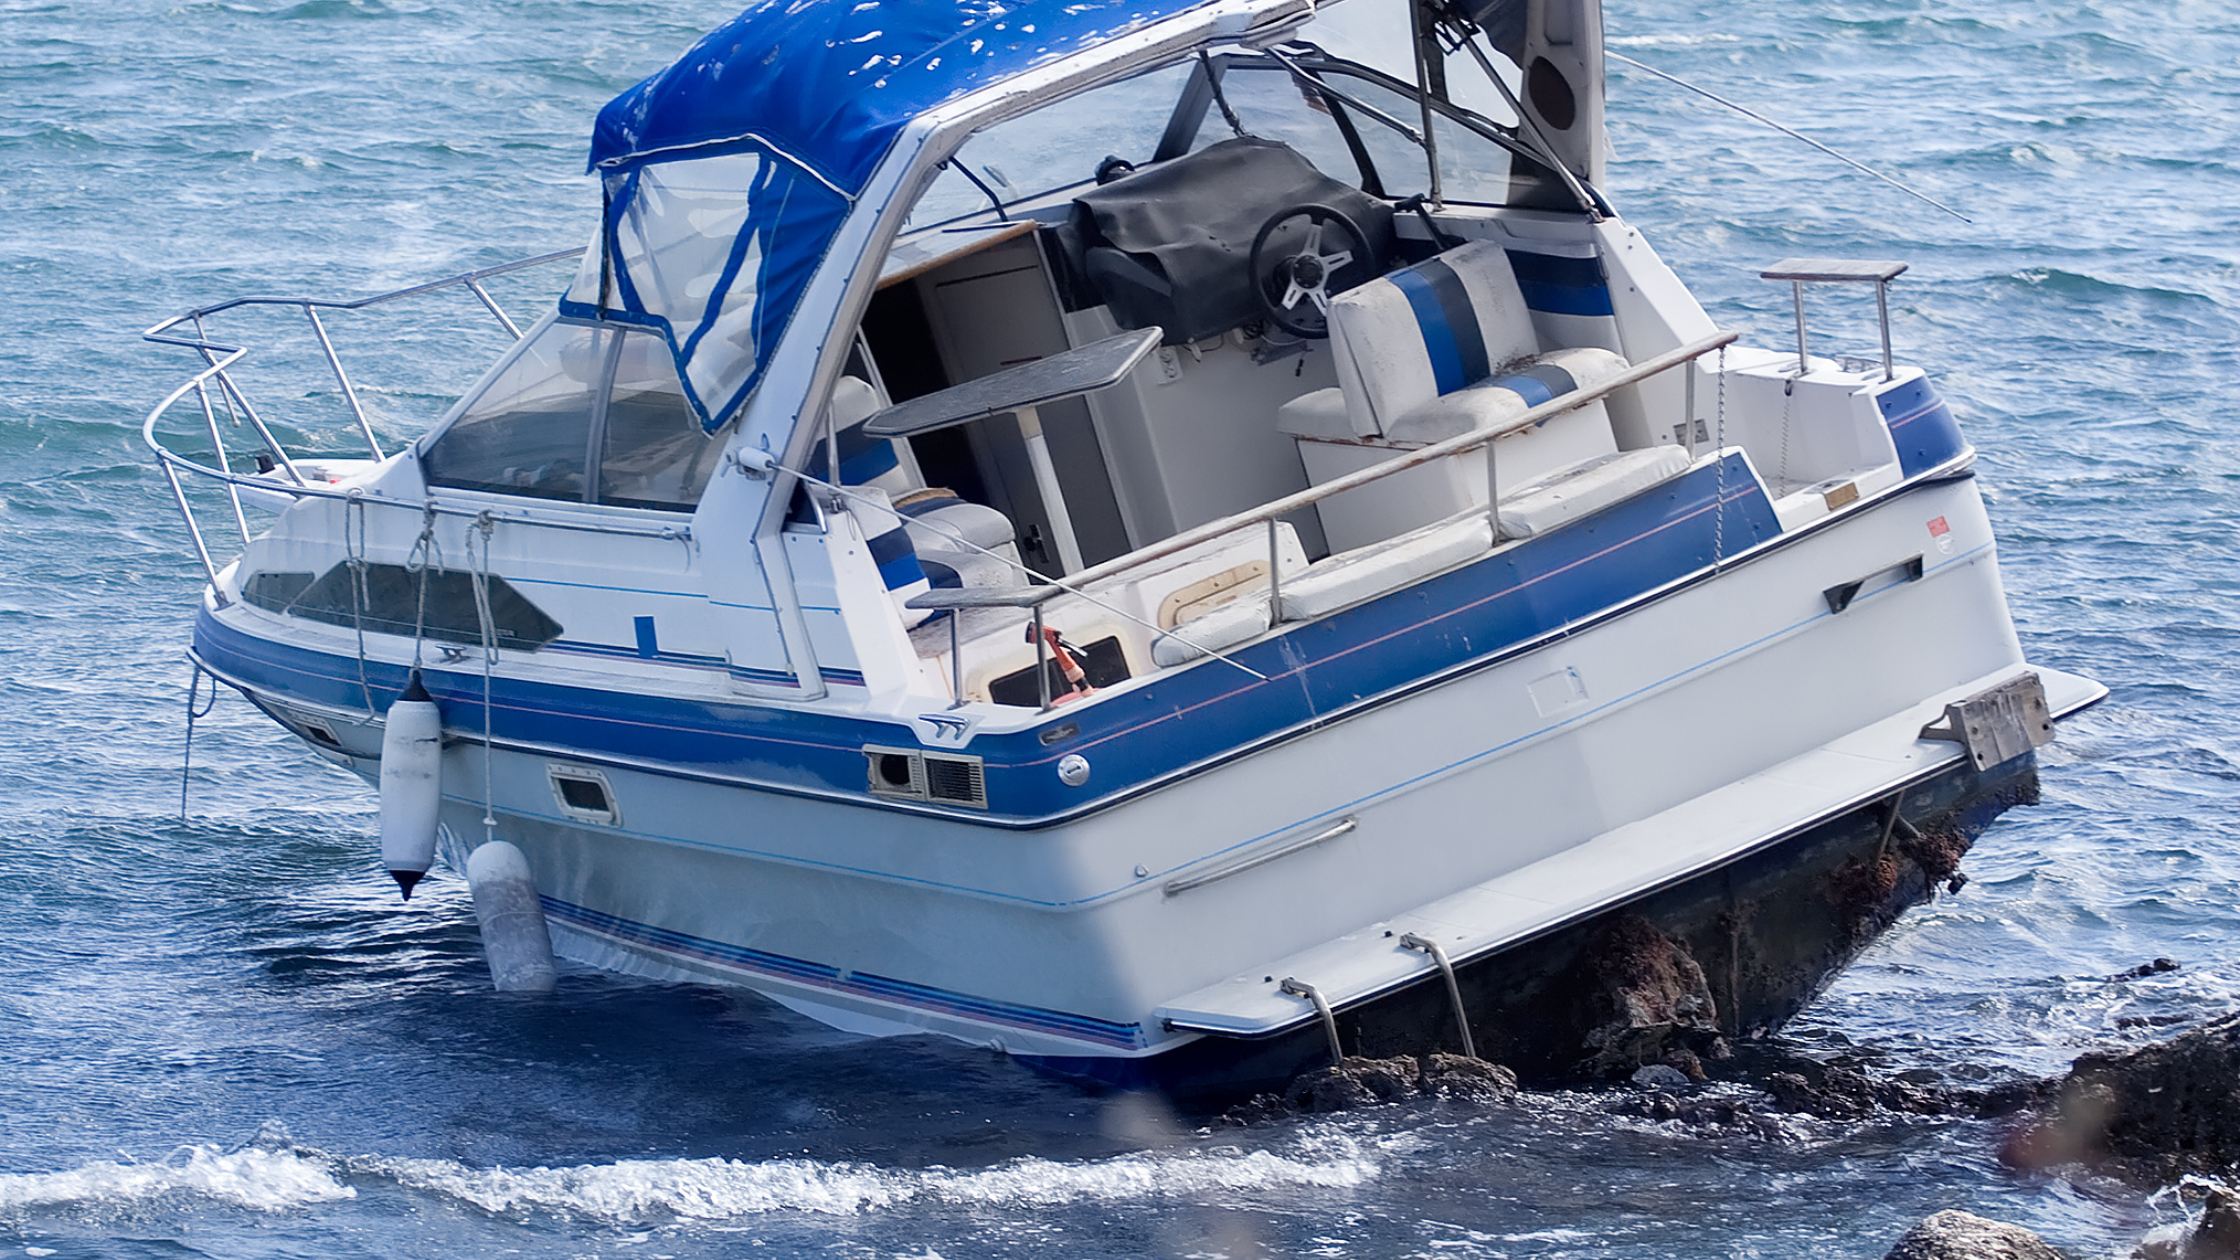 Boat Accident Lawyer In Redlands, CA